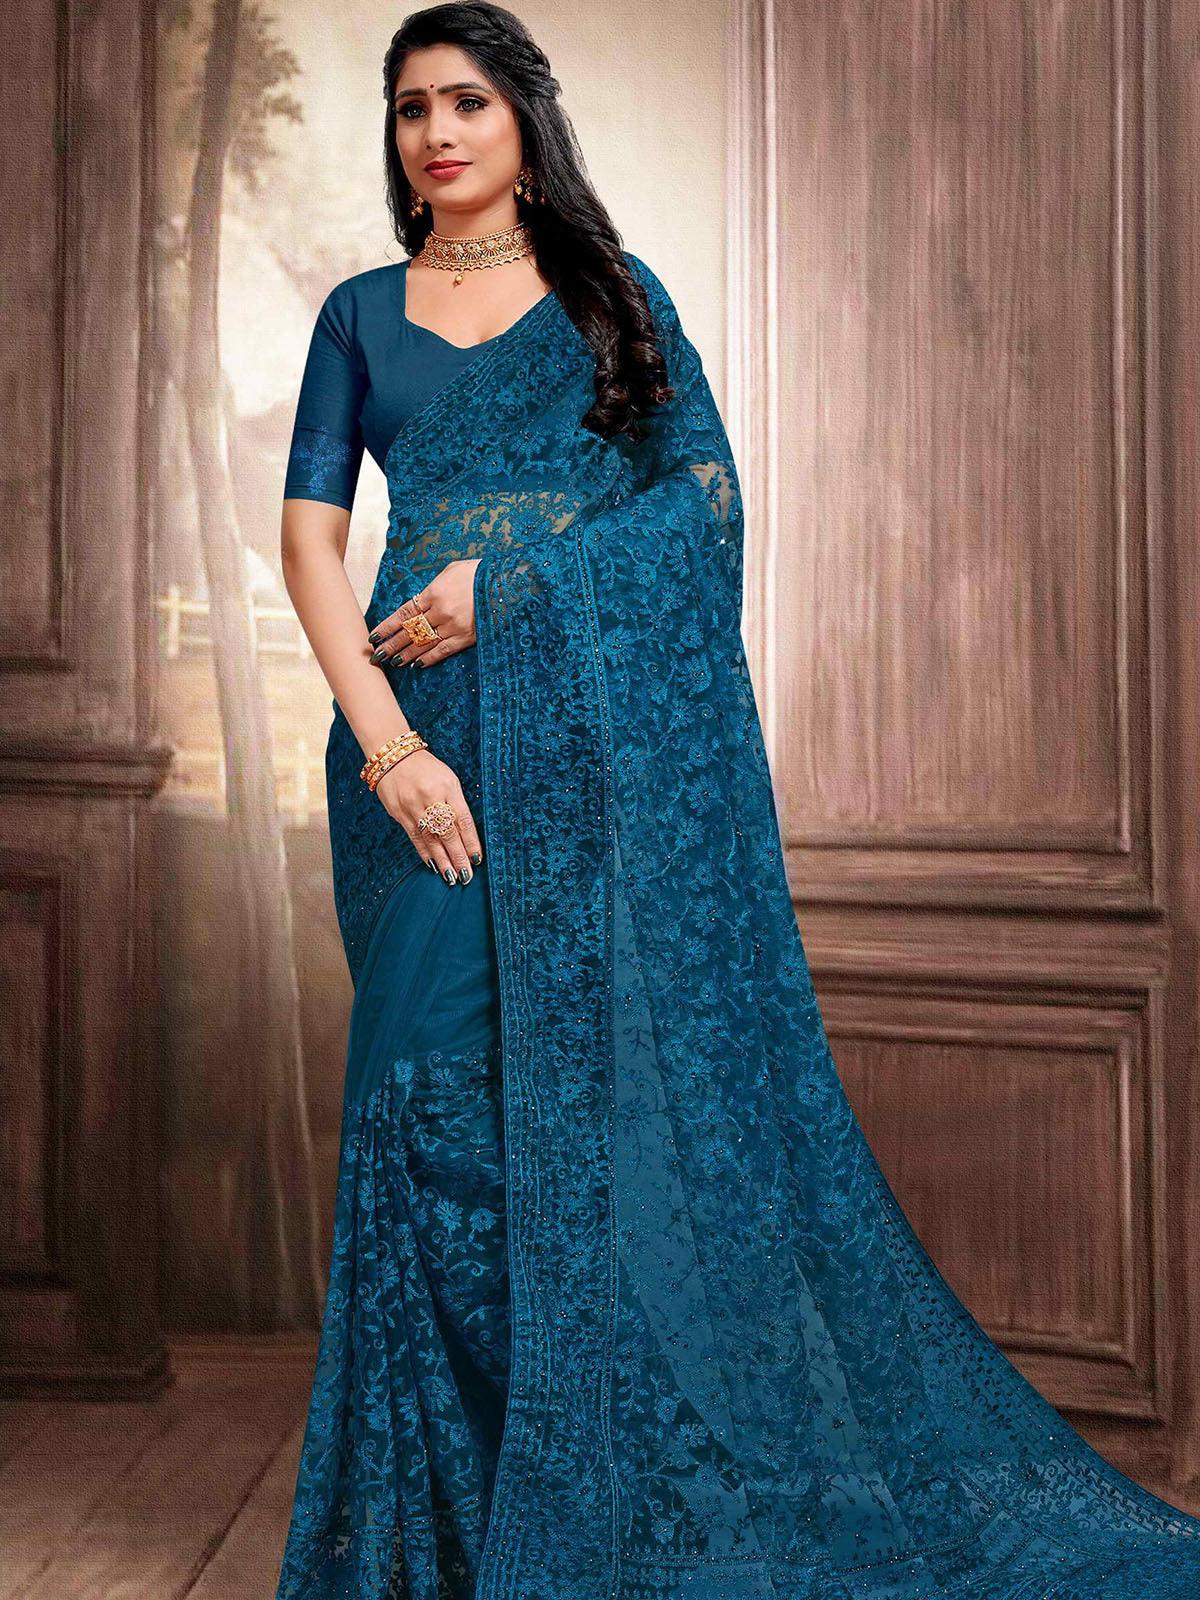 Women's Teal Blue Heavy Embroidered Net  Saree - Odette